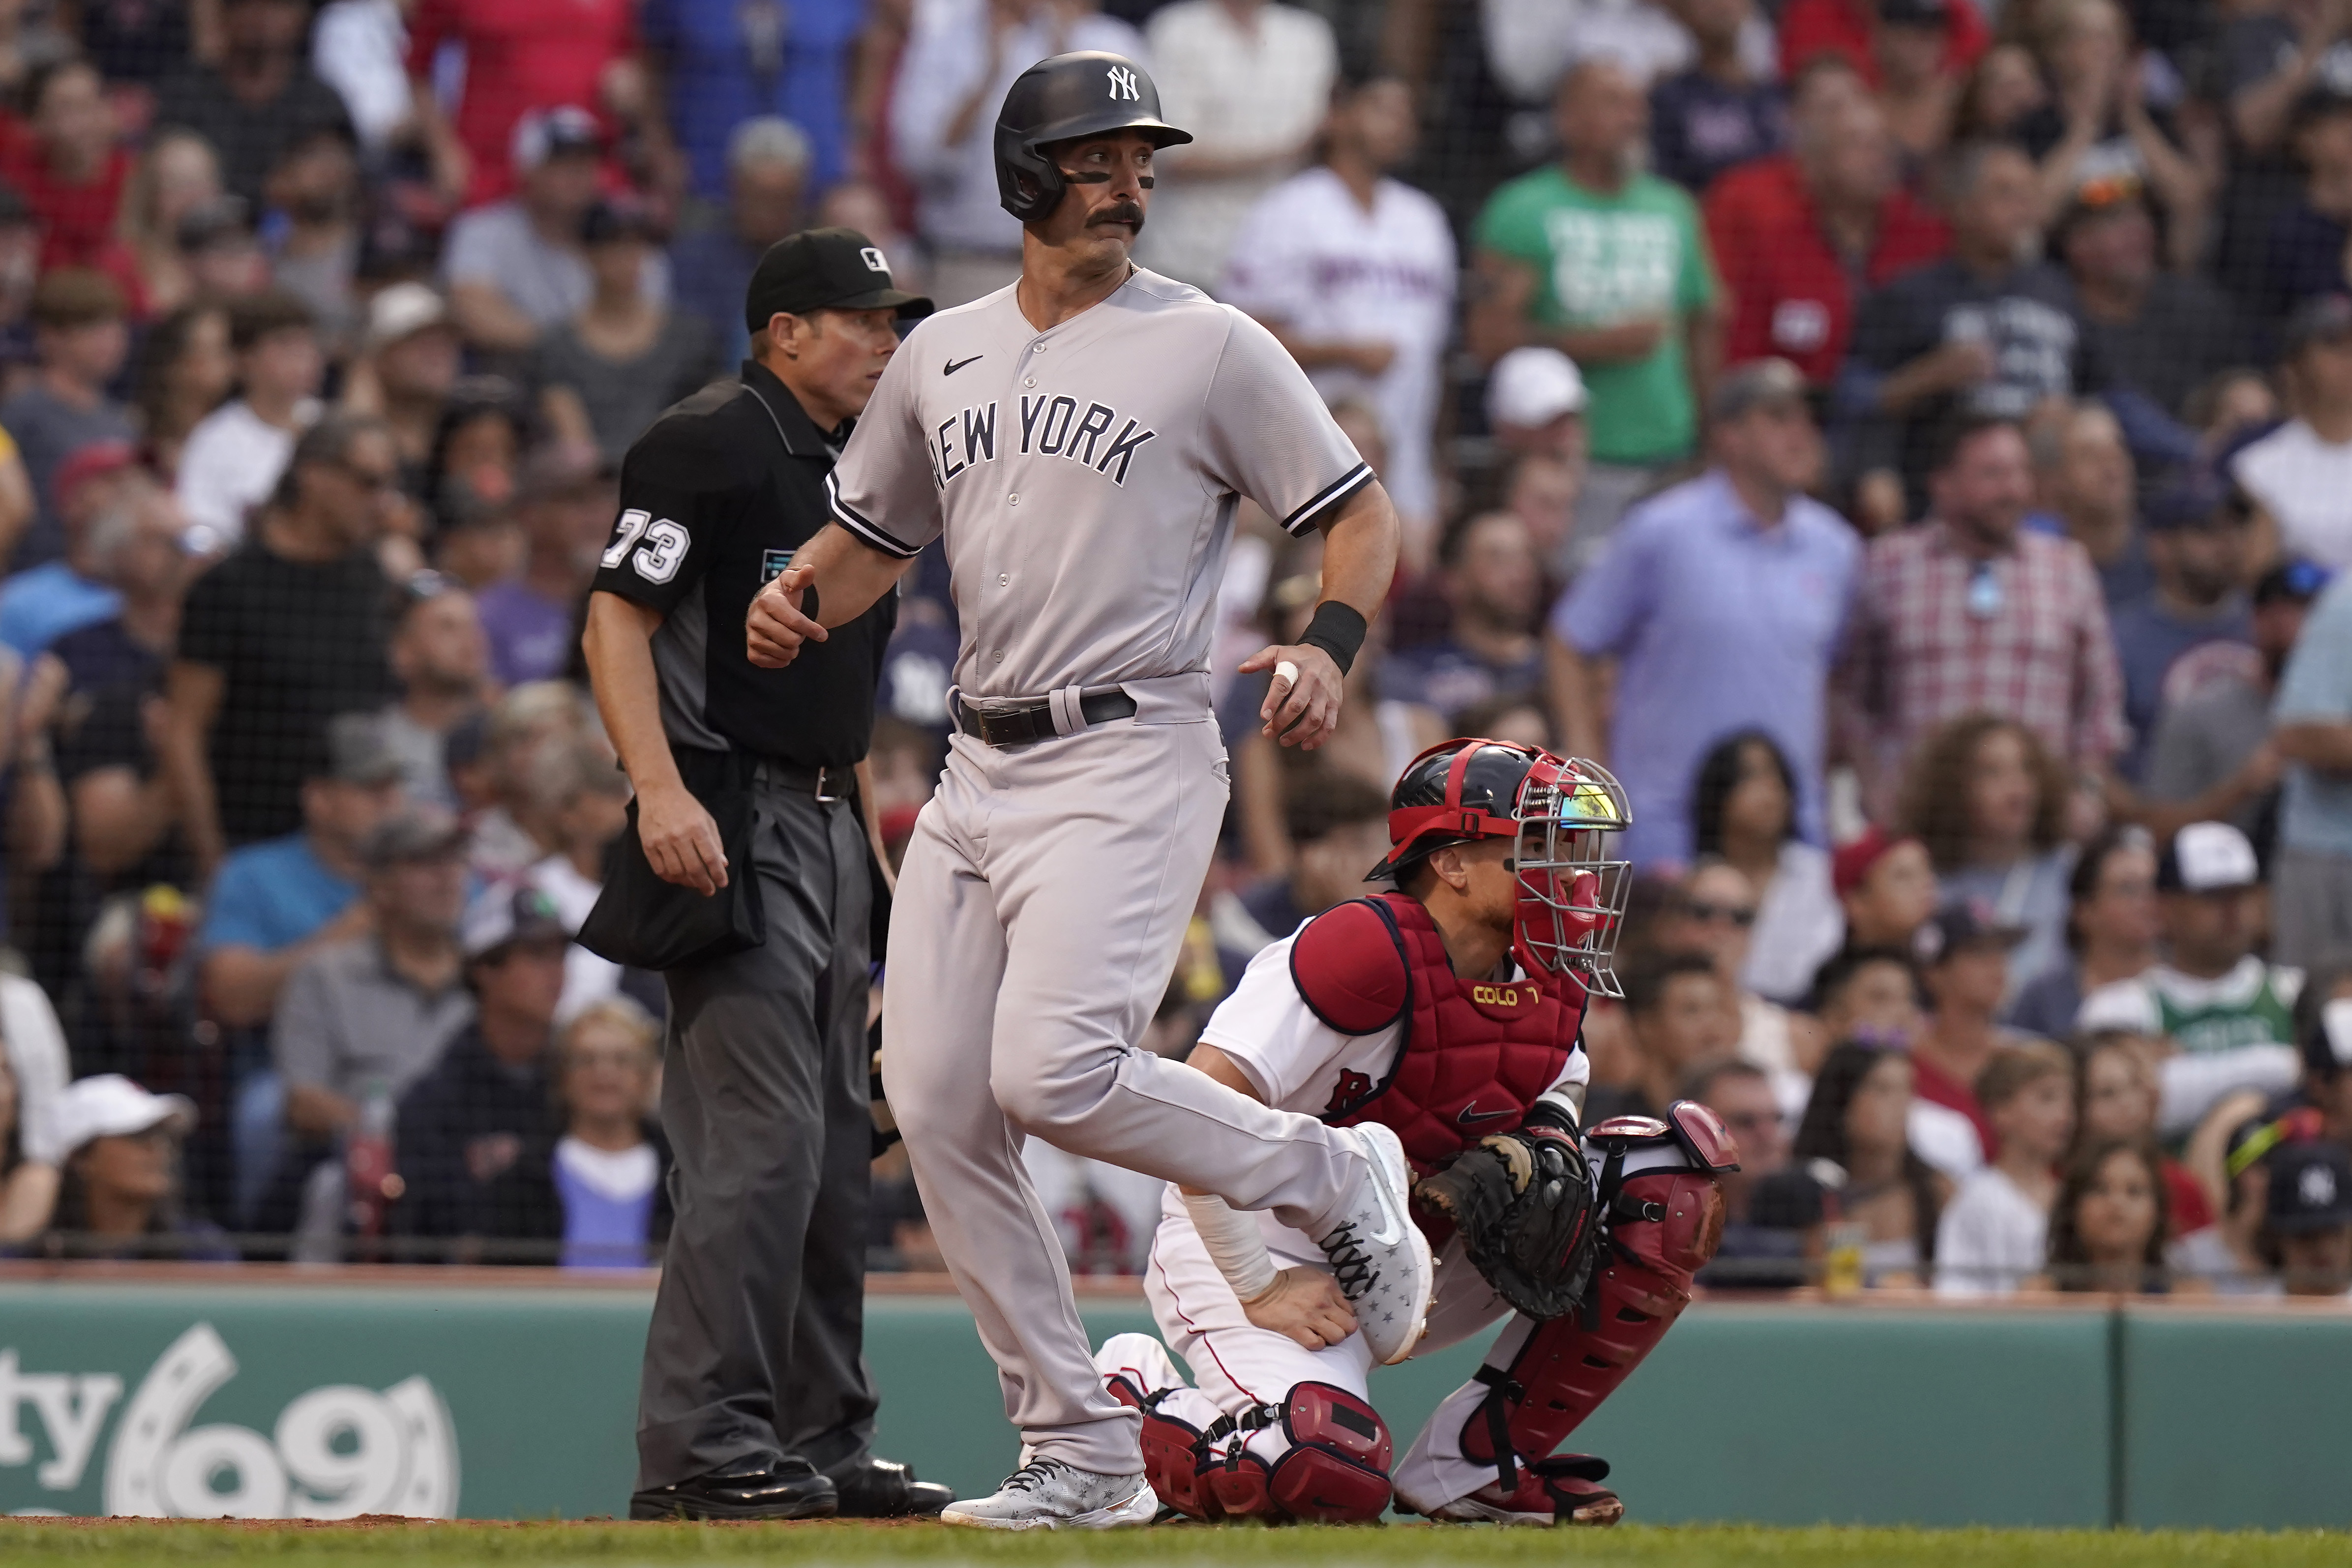 How to Watch the Reds vs. Yankees Game: Streaming & TV Info